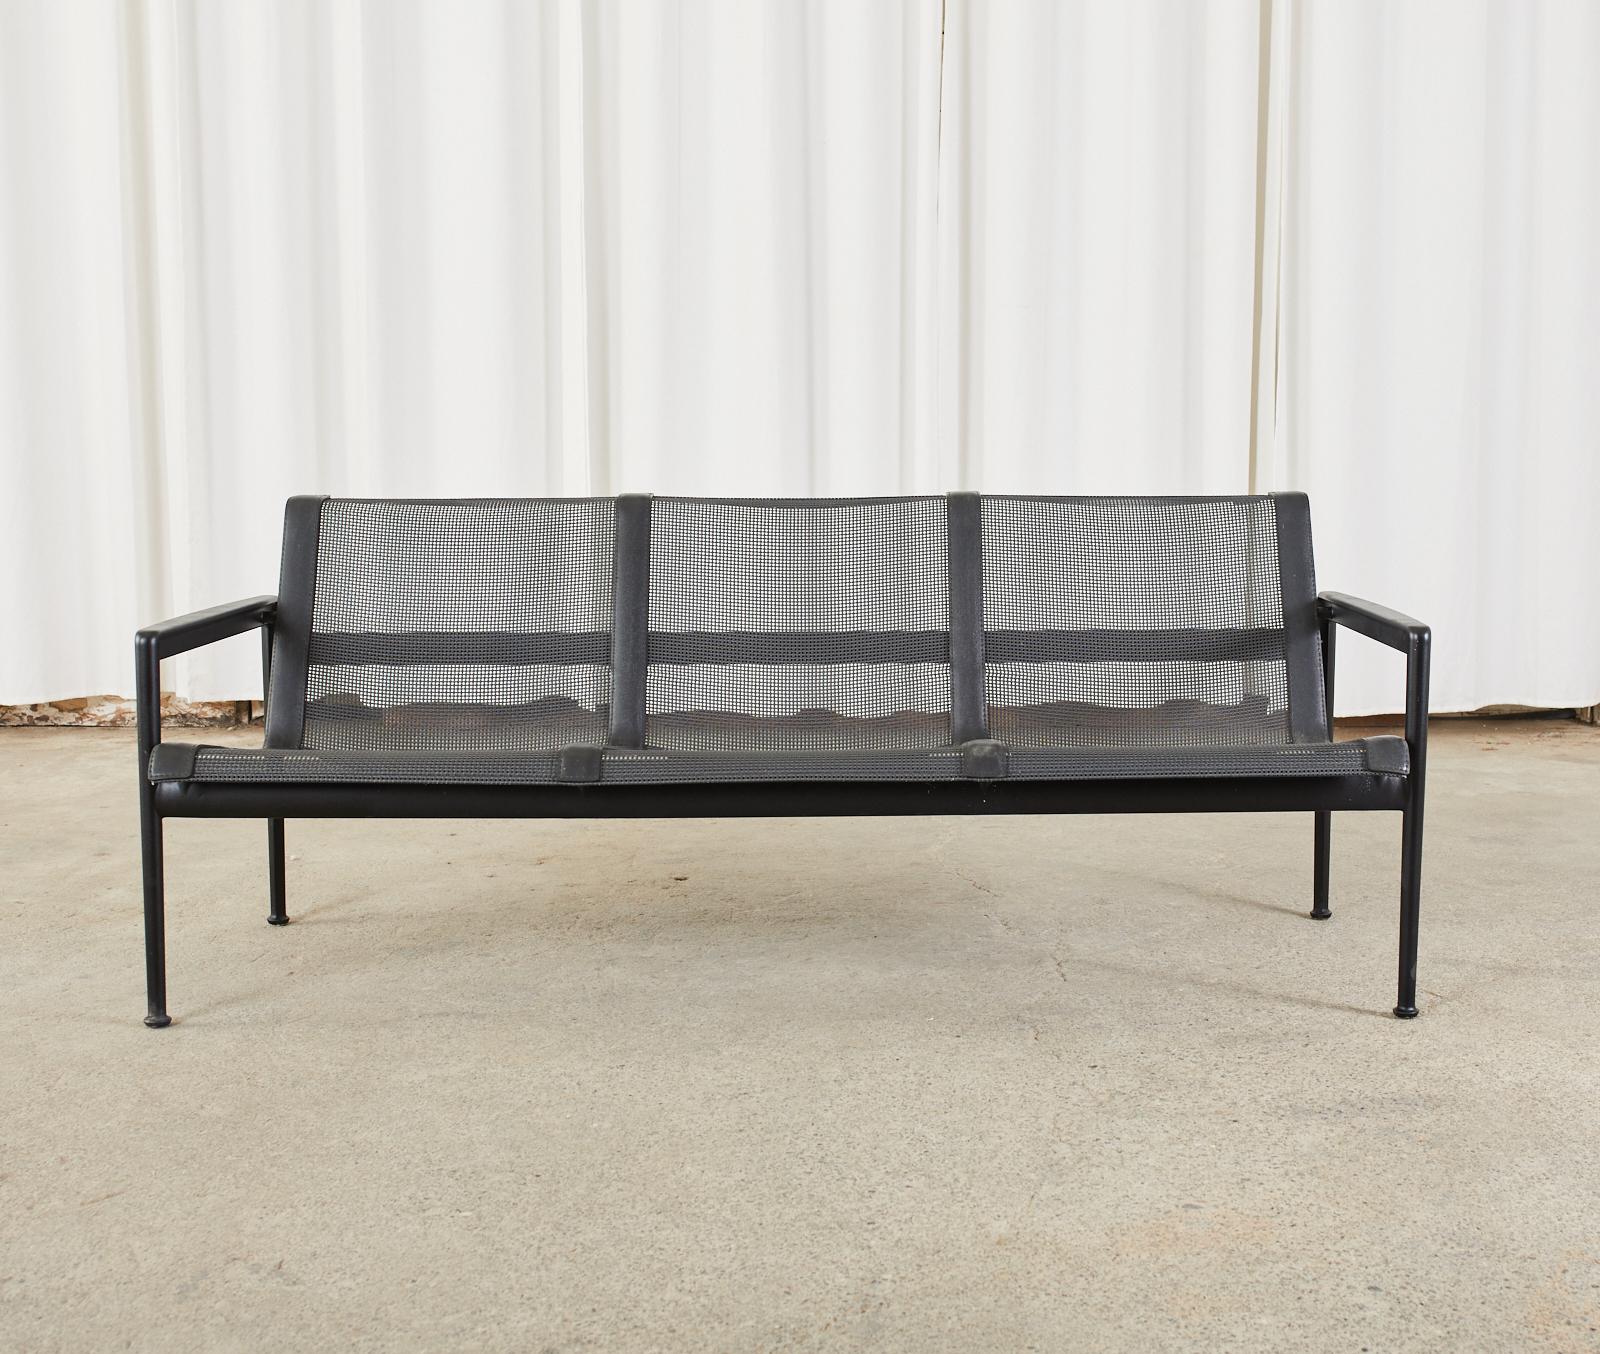 Stylish pair of Mid-Century Modern designed patio and garden lounge sofa and settee. Designed by Richard Schultz for Florence Knoll in 1966. The set consists of a three seat lounge measuring 66 inches wide and a two seat lounge measuring 46 inches